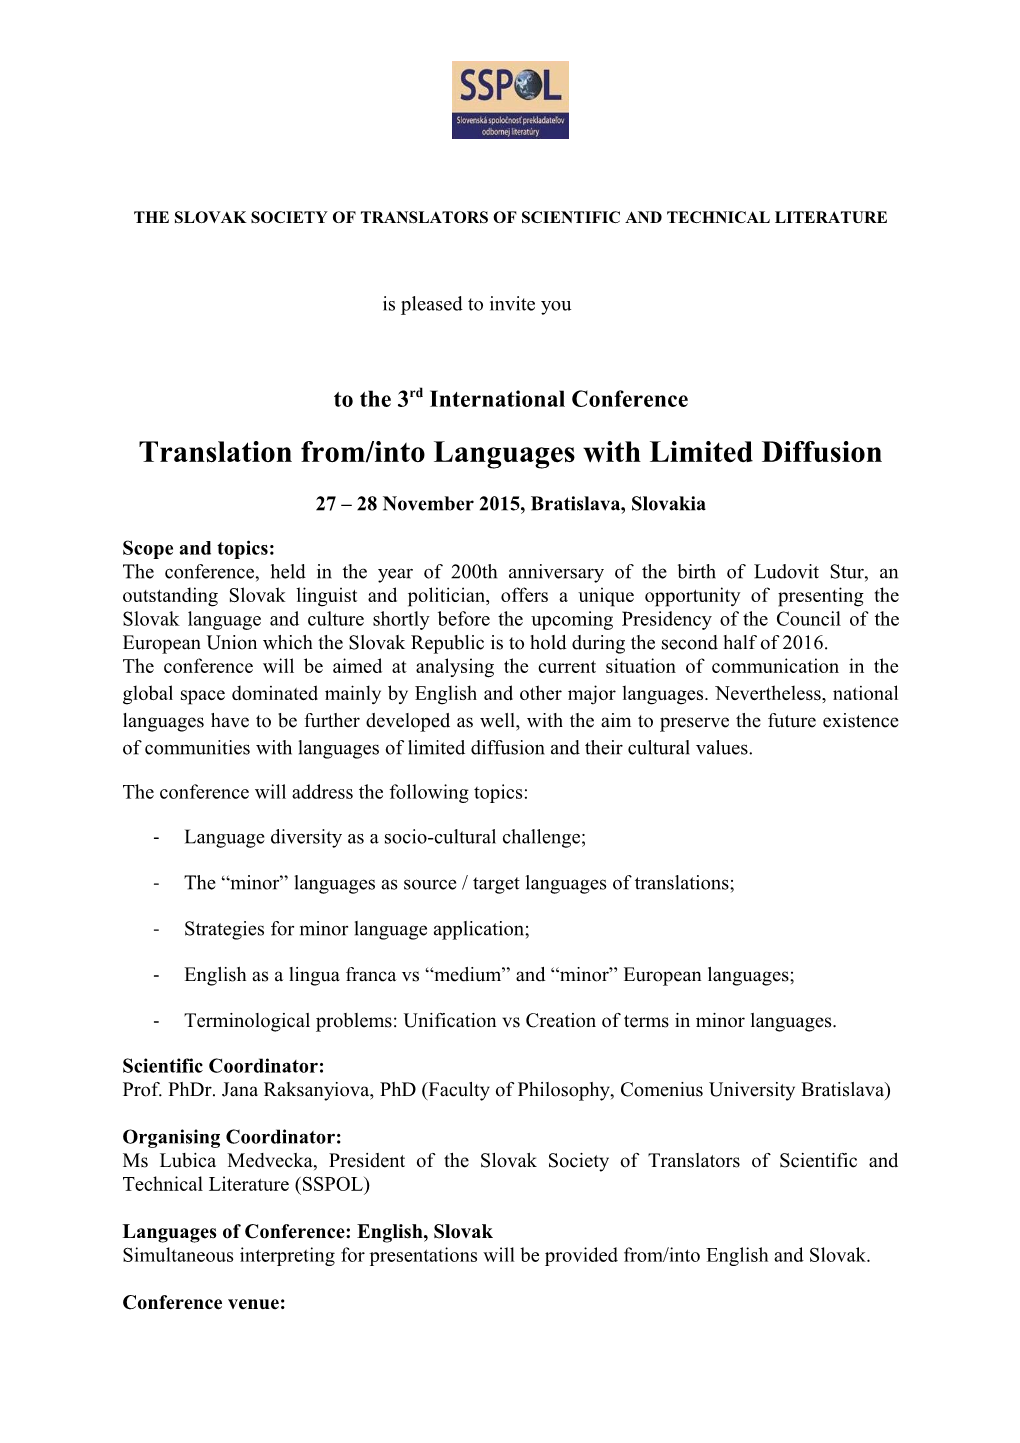 The Slovak Society of Translators of Scientific and Technical Literature